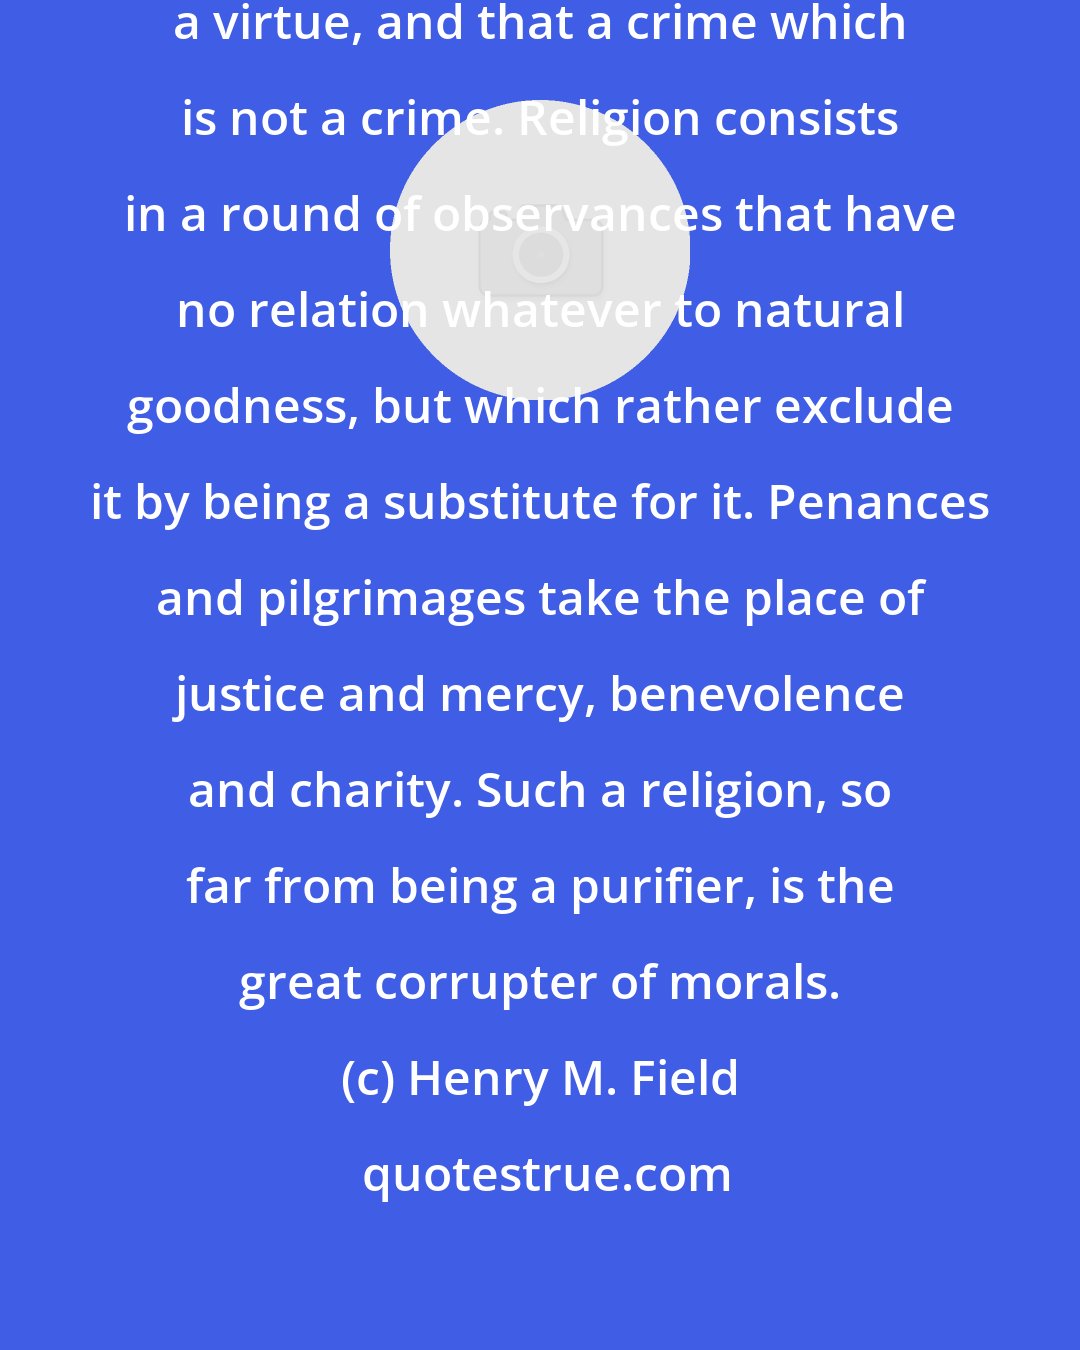 Henry M. Field: It makes that a virtue which is not a virtue, and that a crime which is not a crime. Religion consists in a round of observances that have no relation whatever to natural goodness, but which rather exclude it by being a substitute for it. Penances and pilgrimages take the place of justice and mercy, benevolence and charity. Such a religion, so far from being a purifier, is the great corrupter of morals.